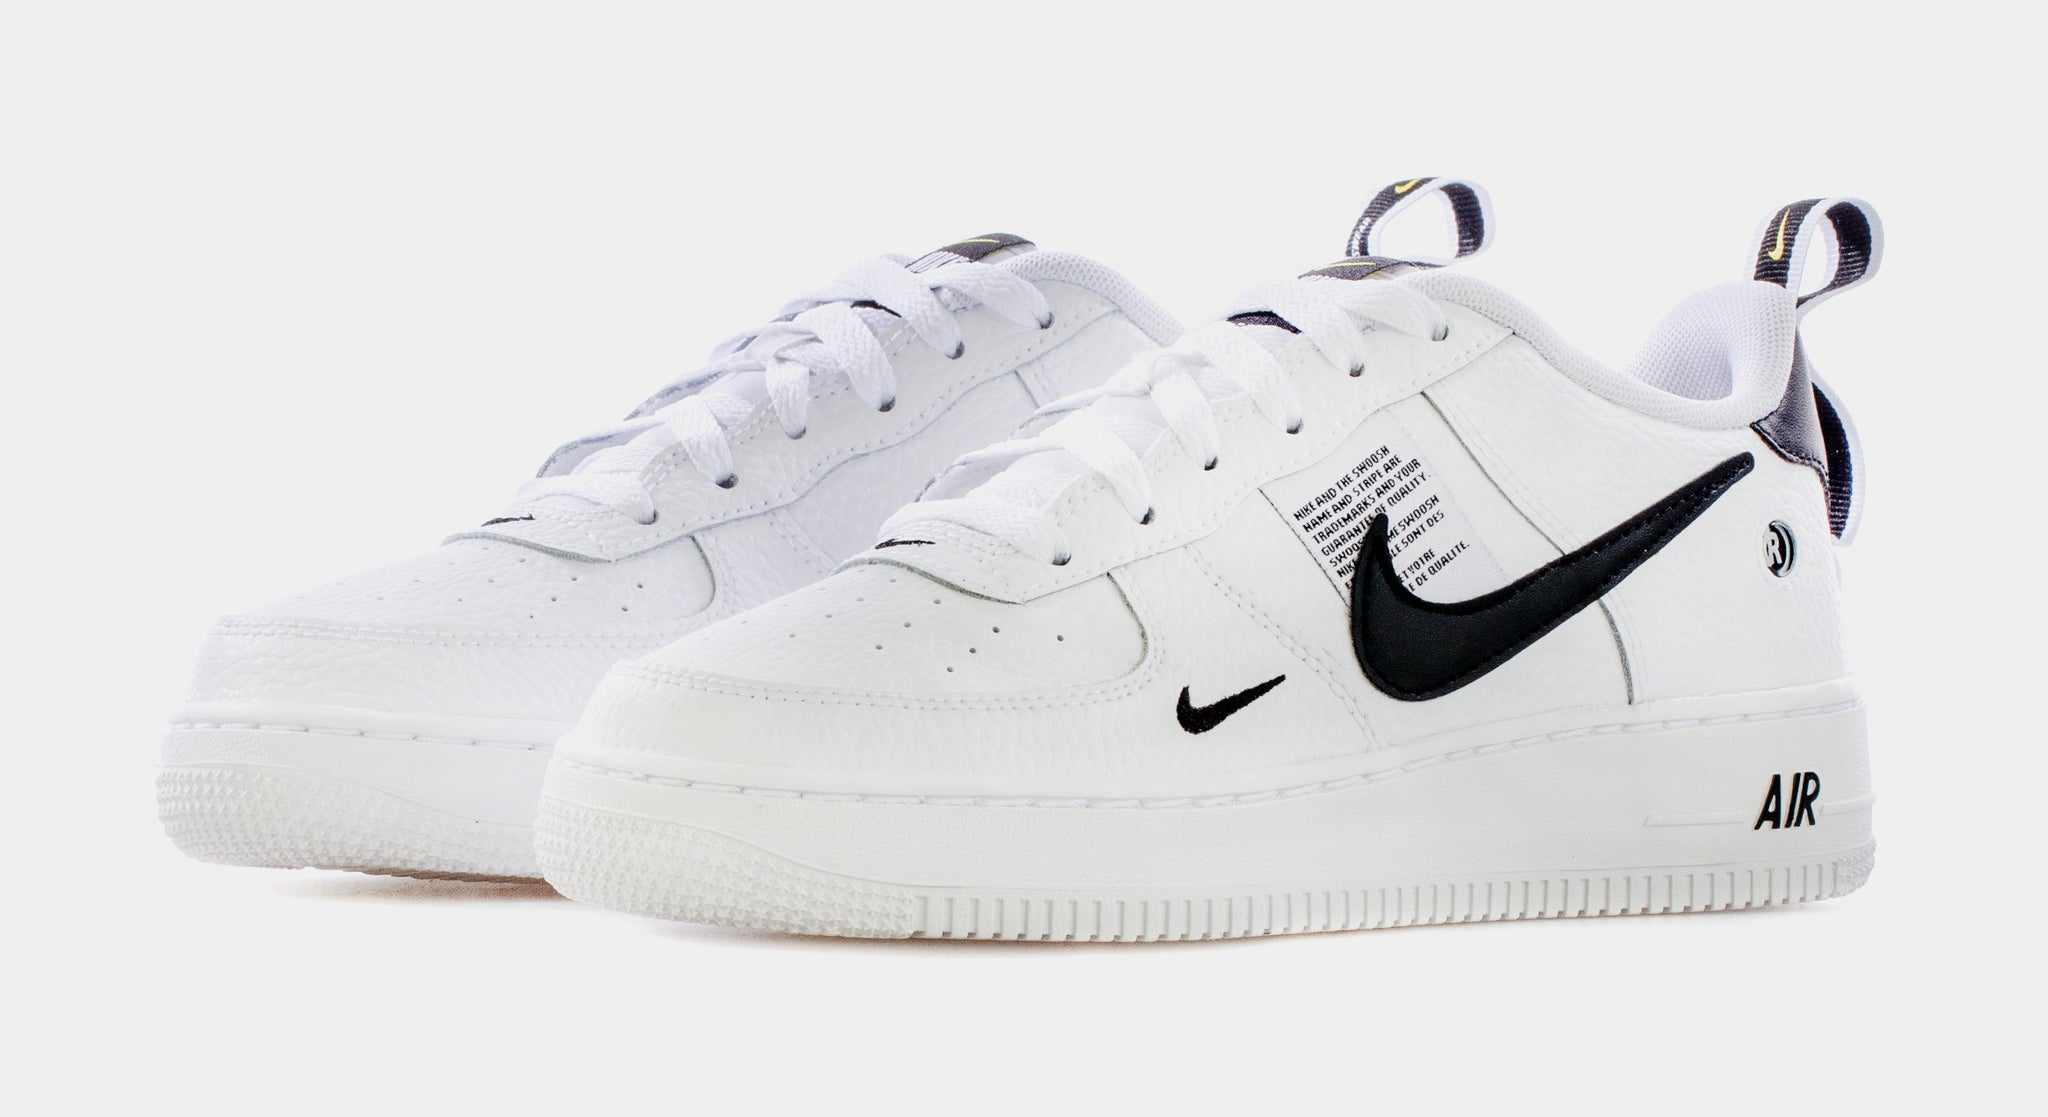 Nike Air Force 1 Grade School Lifestyle Shoes White AR1708-100 – Shoe Palace